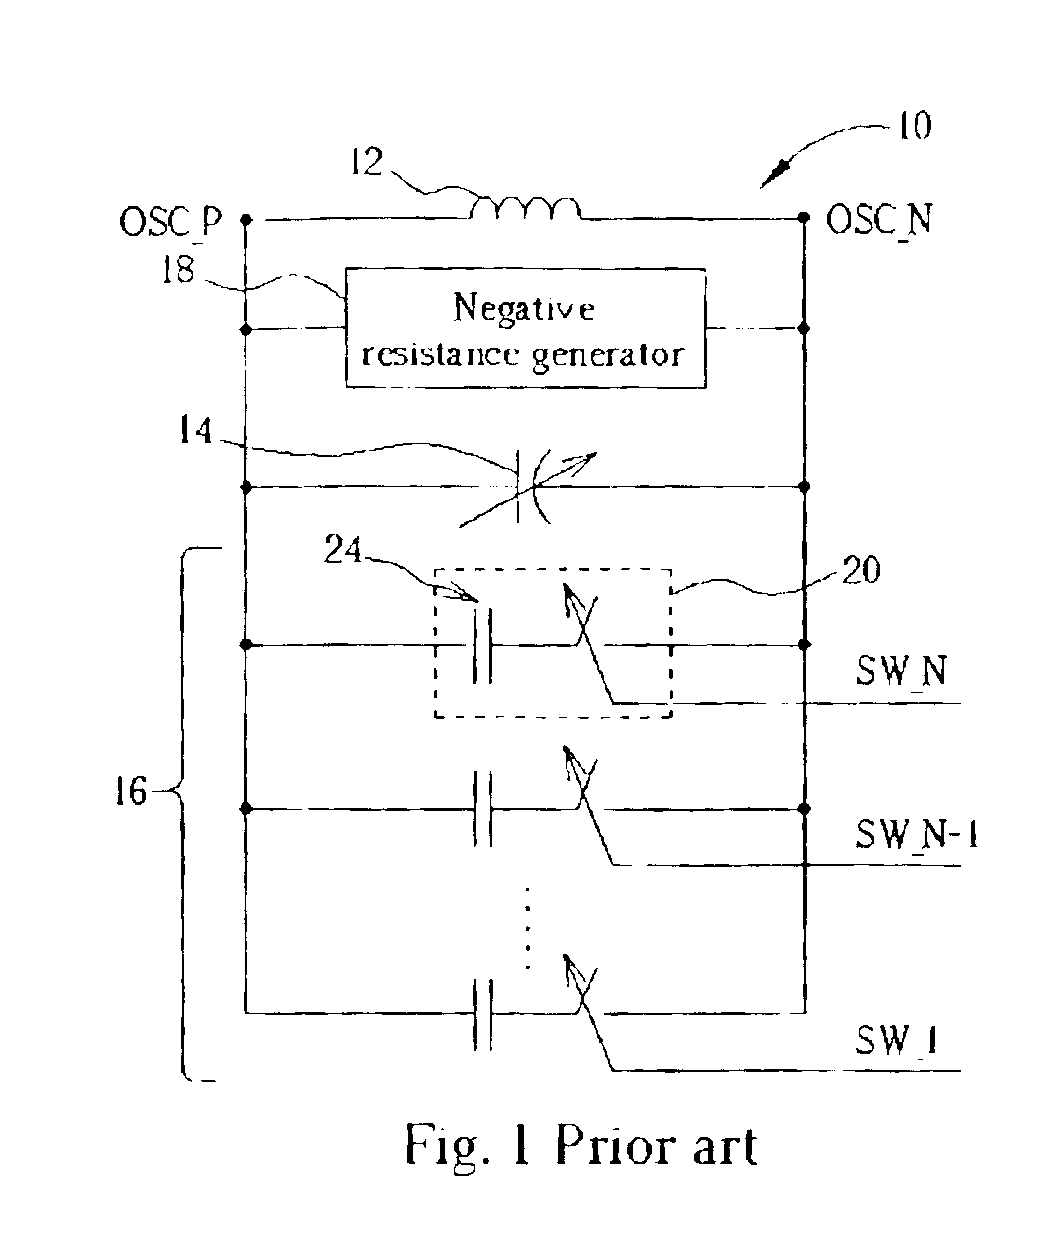 Switched capacitor circuit capable of eliminating clock feedthrough by complementary control signals for digital tuning VCO